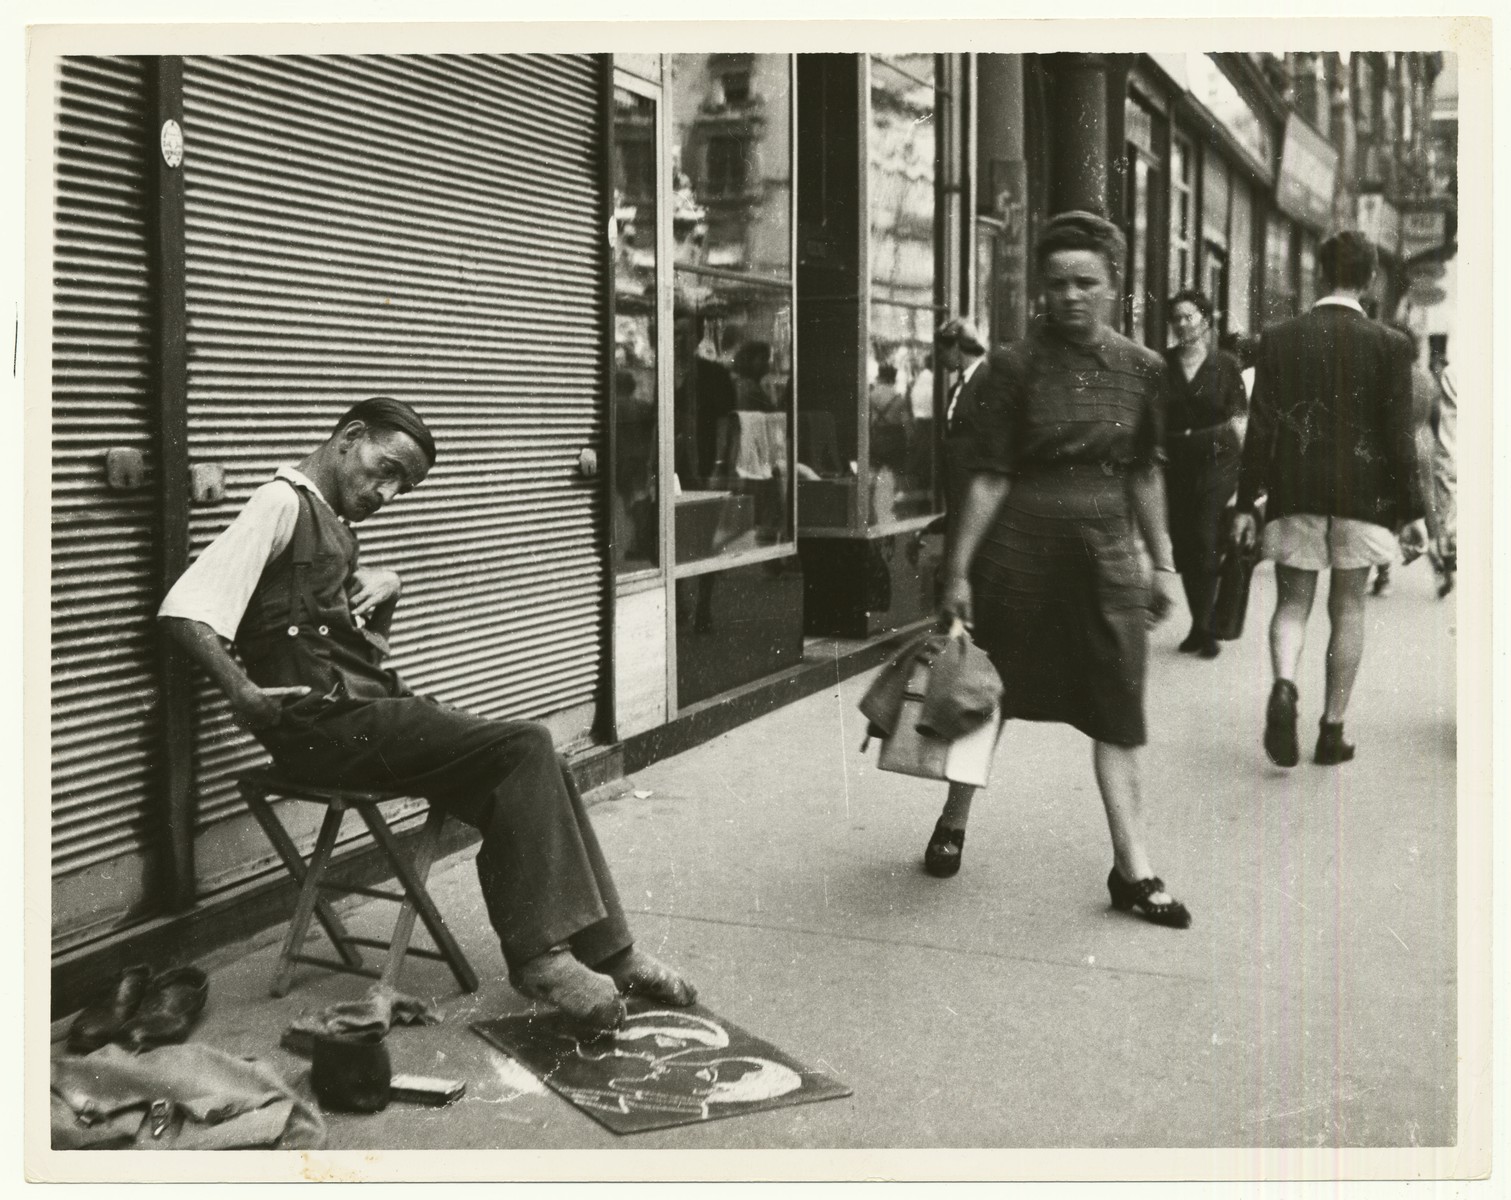 A partly paralyzed beggar sketches with his foot on the Graben in Vienna, Austria

The Graben is one of the most famous streets in Vienna's first district, the city center.  The handwritten caption on the back of the photograph reads: "Partly paralyzed beggar in Vienna on the Graben, drawing with foot."